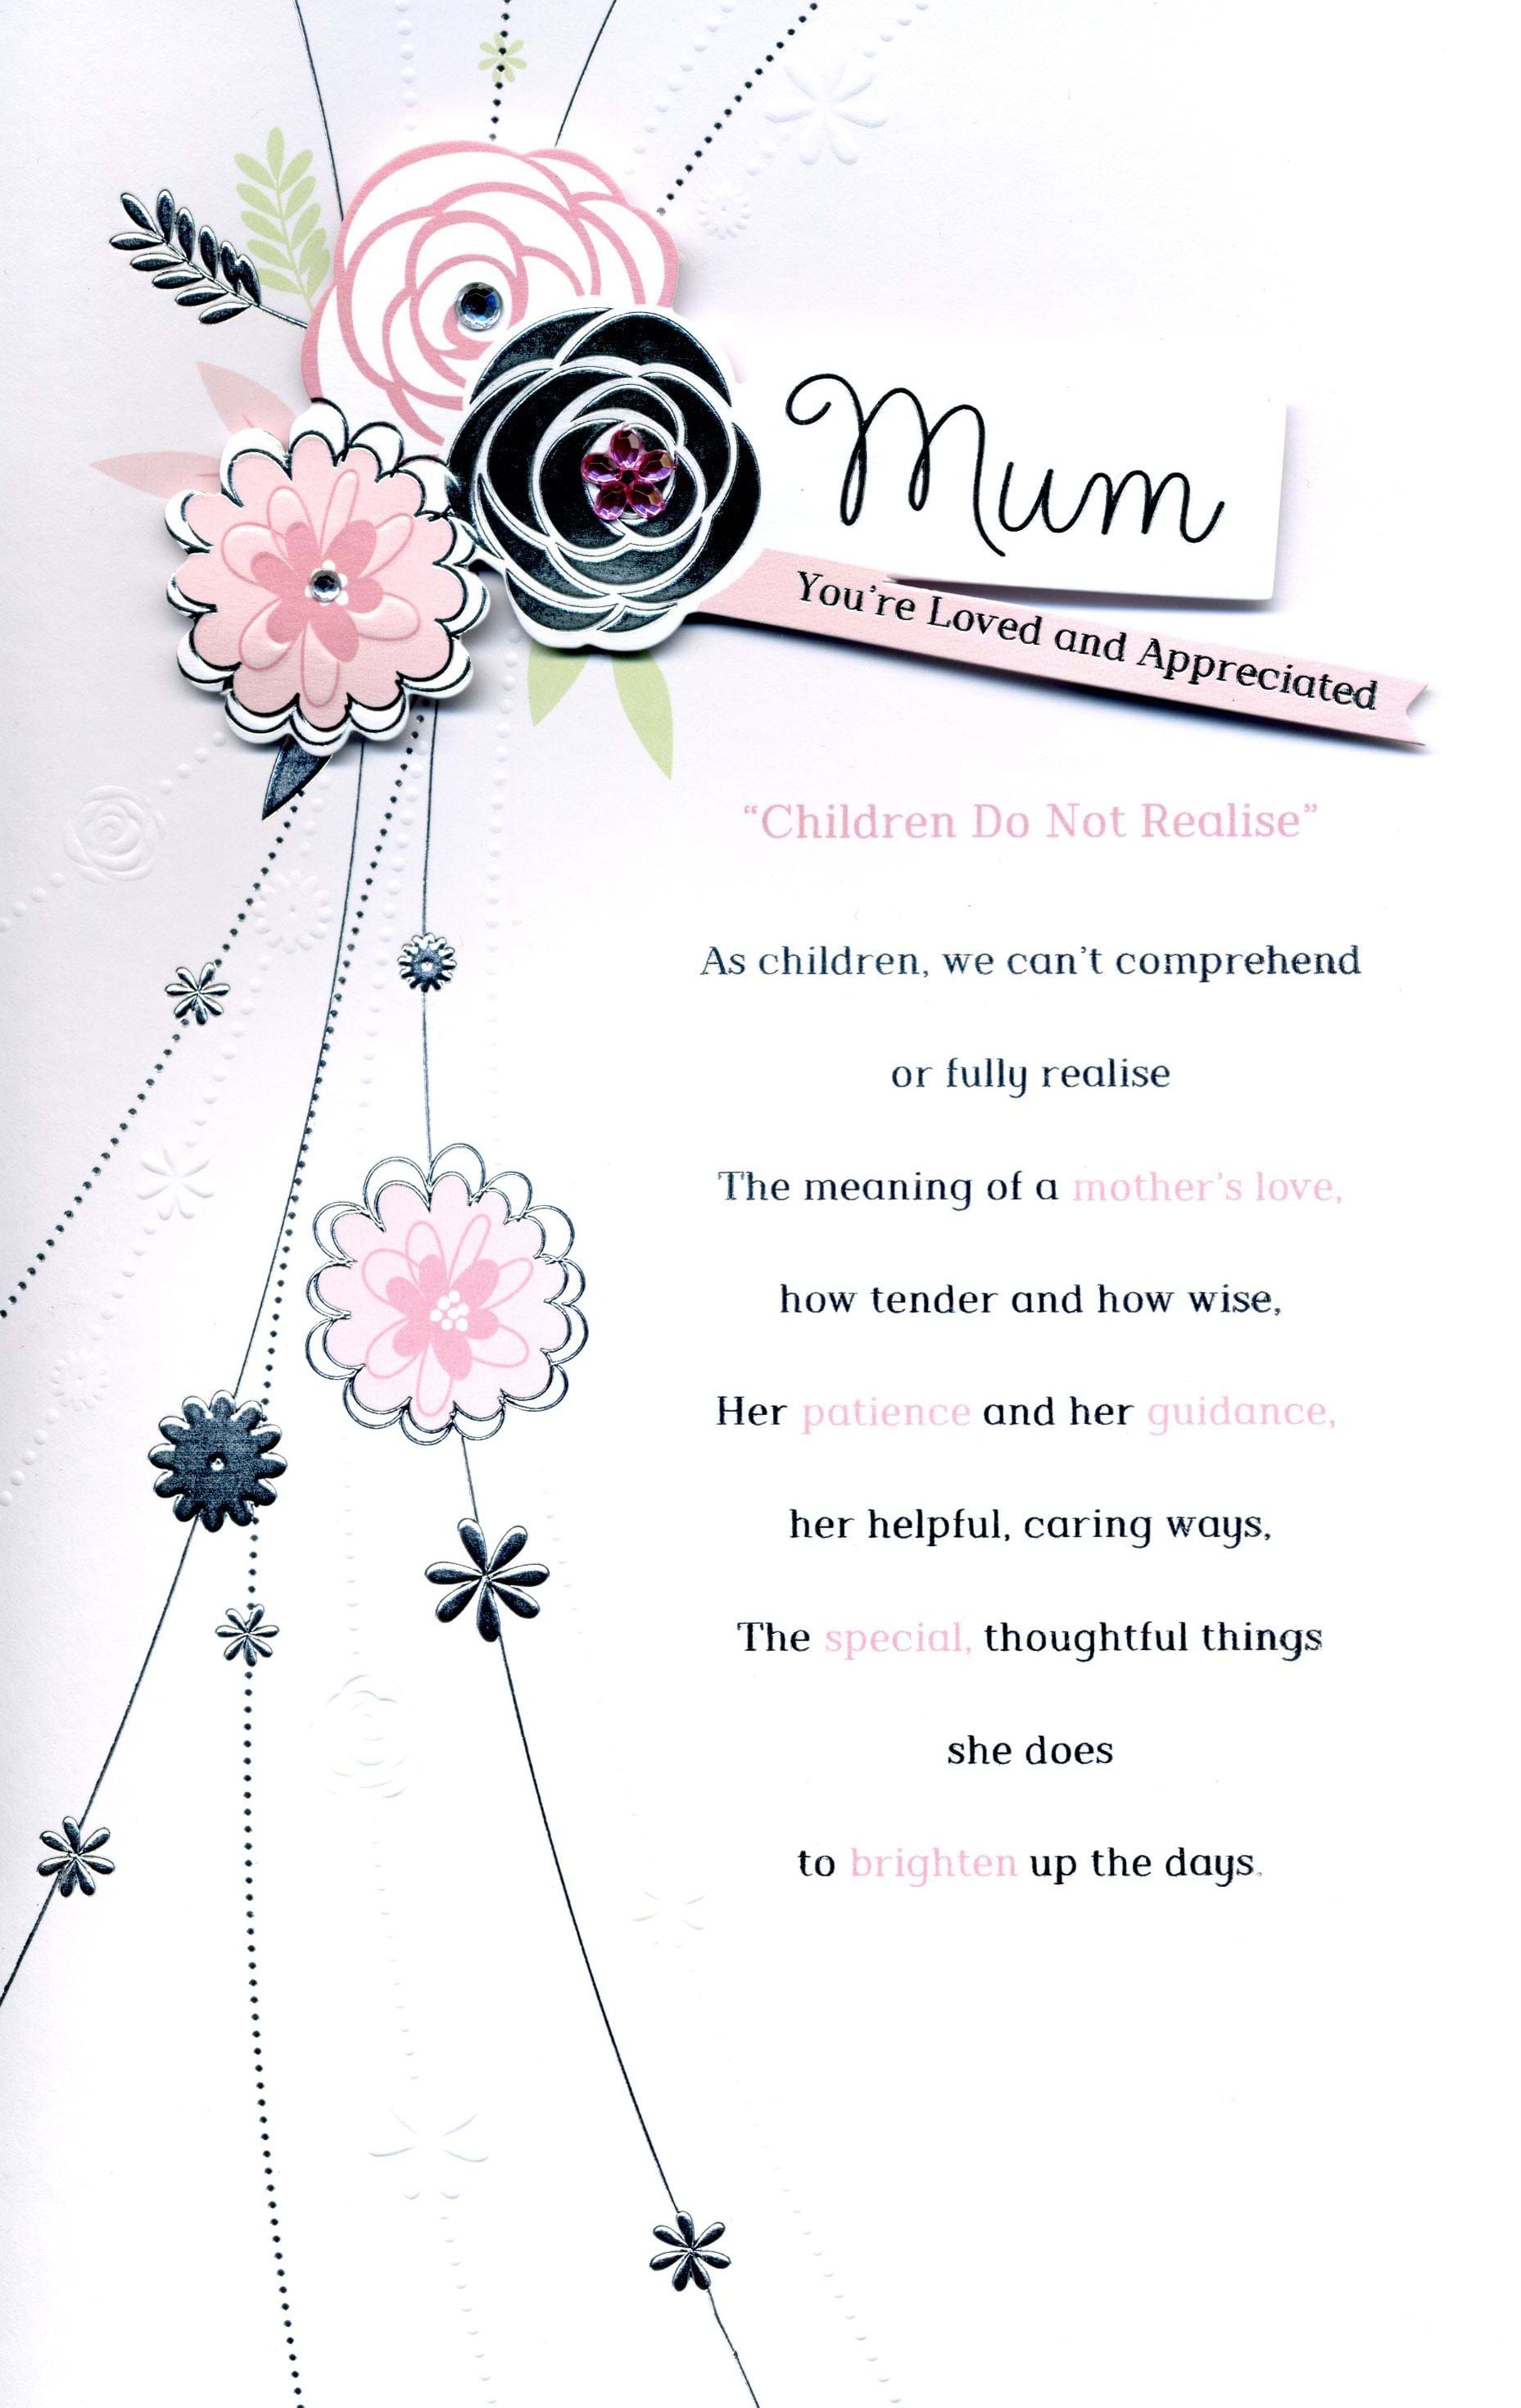 You Are Loved and Appreciated Mum Birthday Card